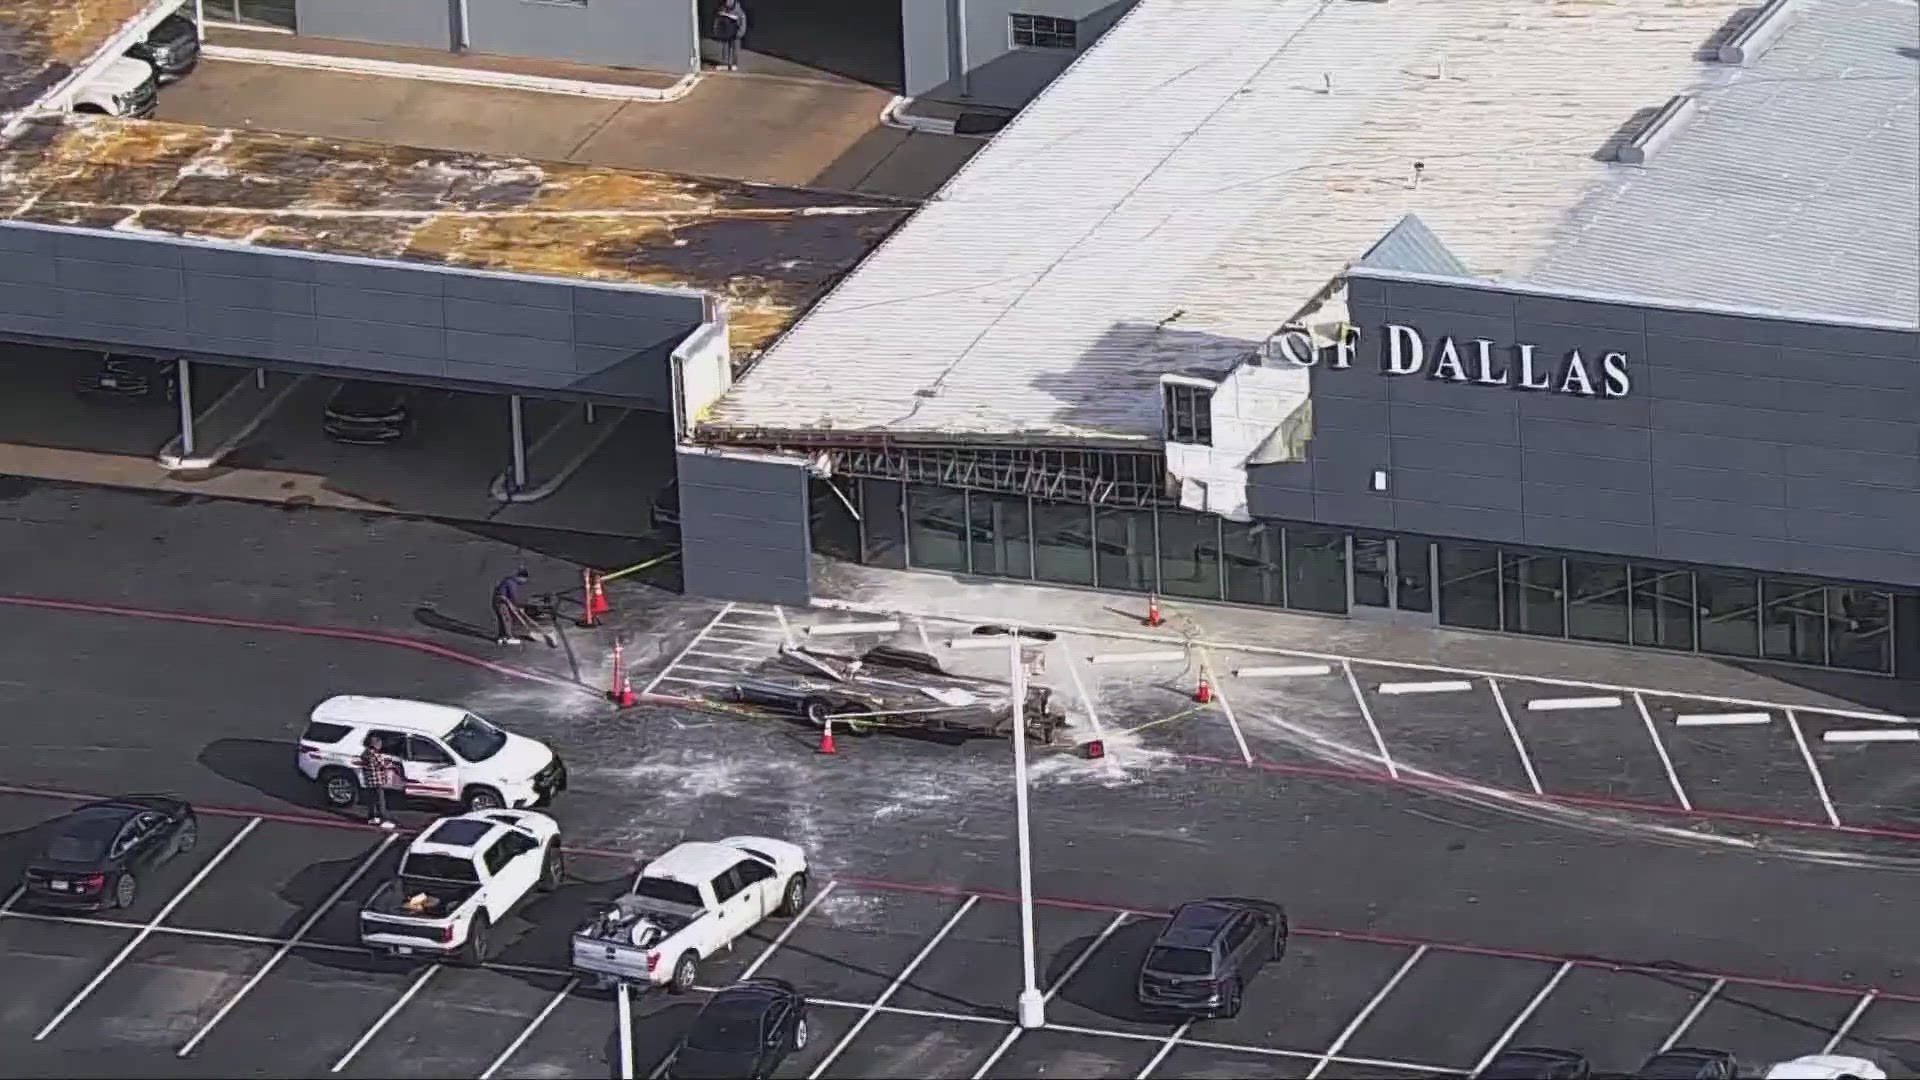 During Thursday’s series of severe thunderstorms, residents from Irving reported hail damage to vehicles and fallen trees, and a car dealership’s roof collapsed.